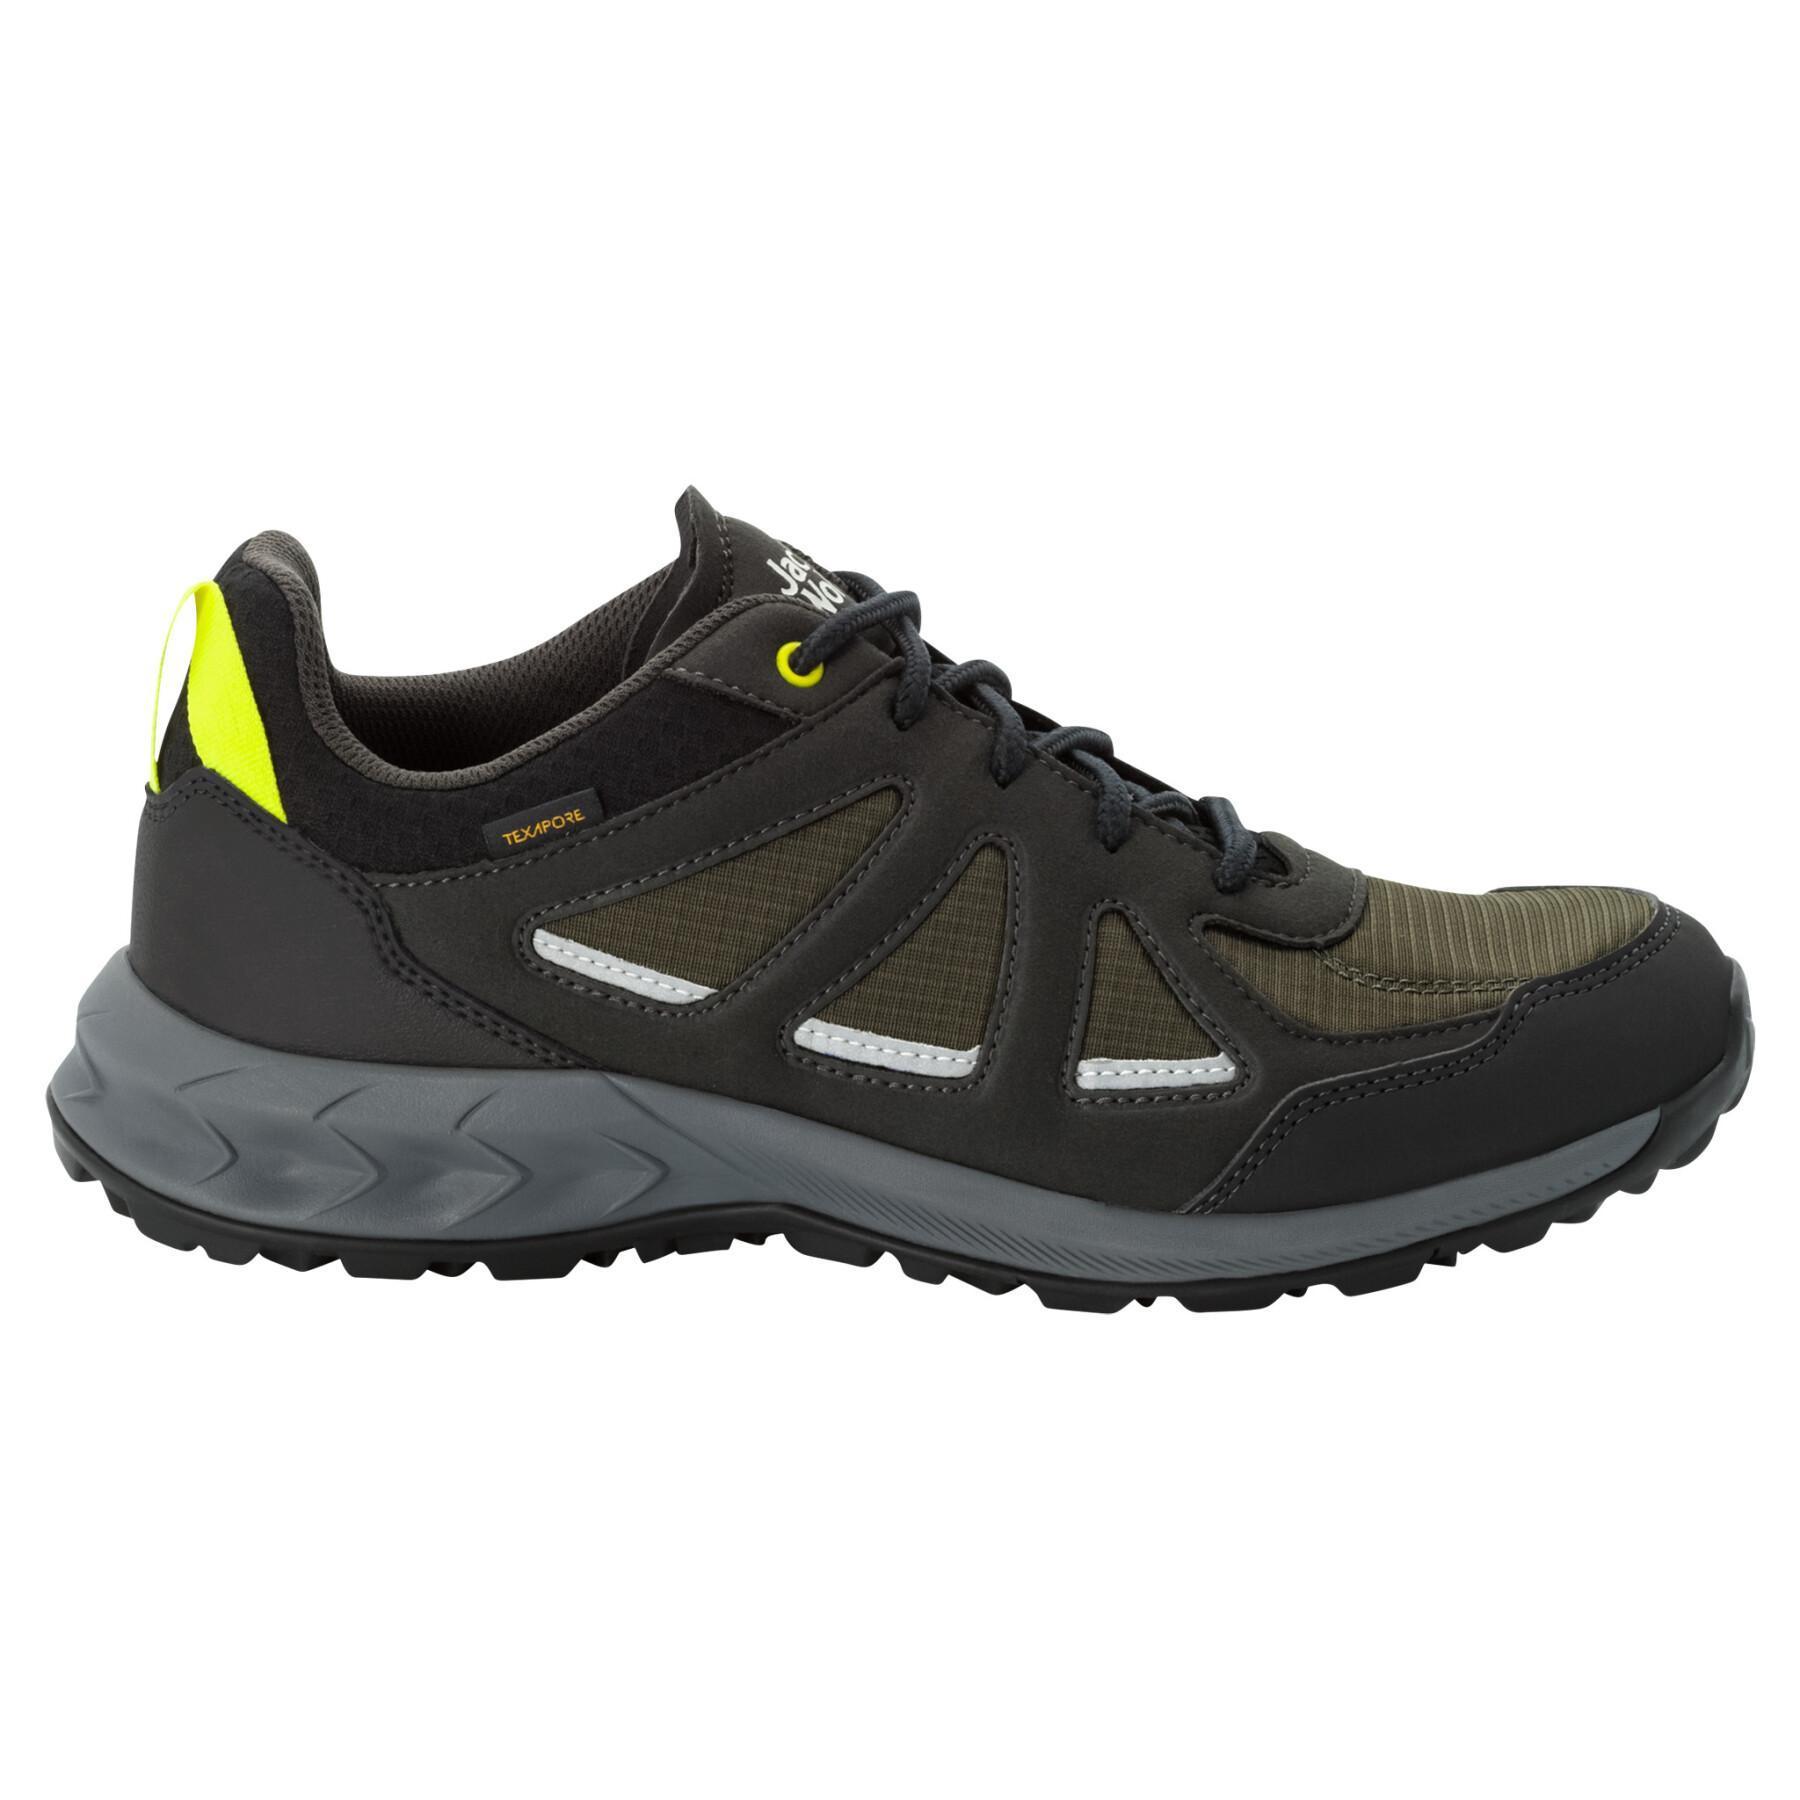 Hiking shoes Jack Wolfskin Woodland 2 Texapore Low GT